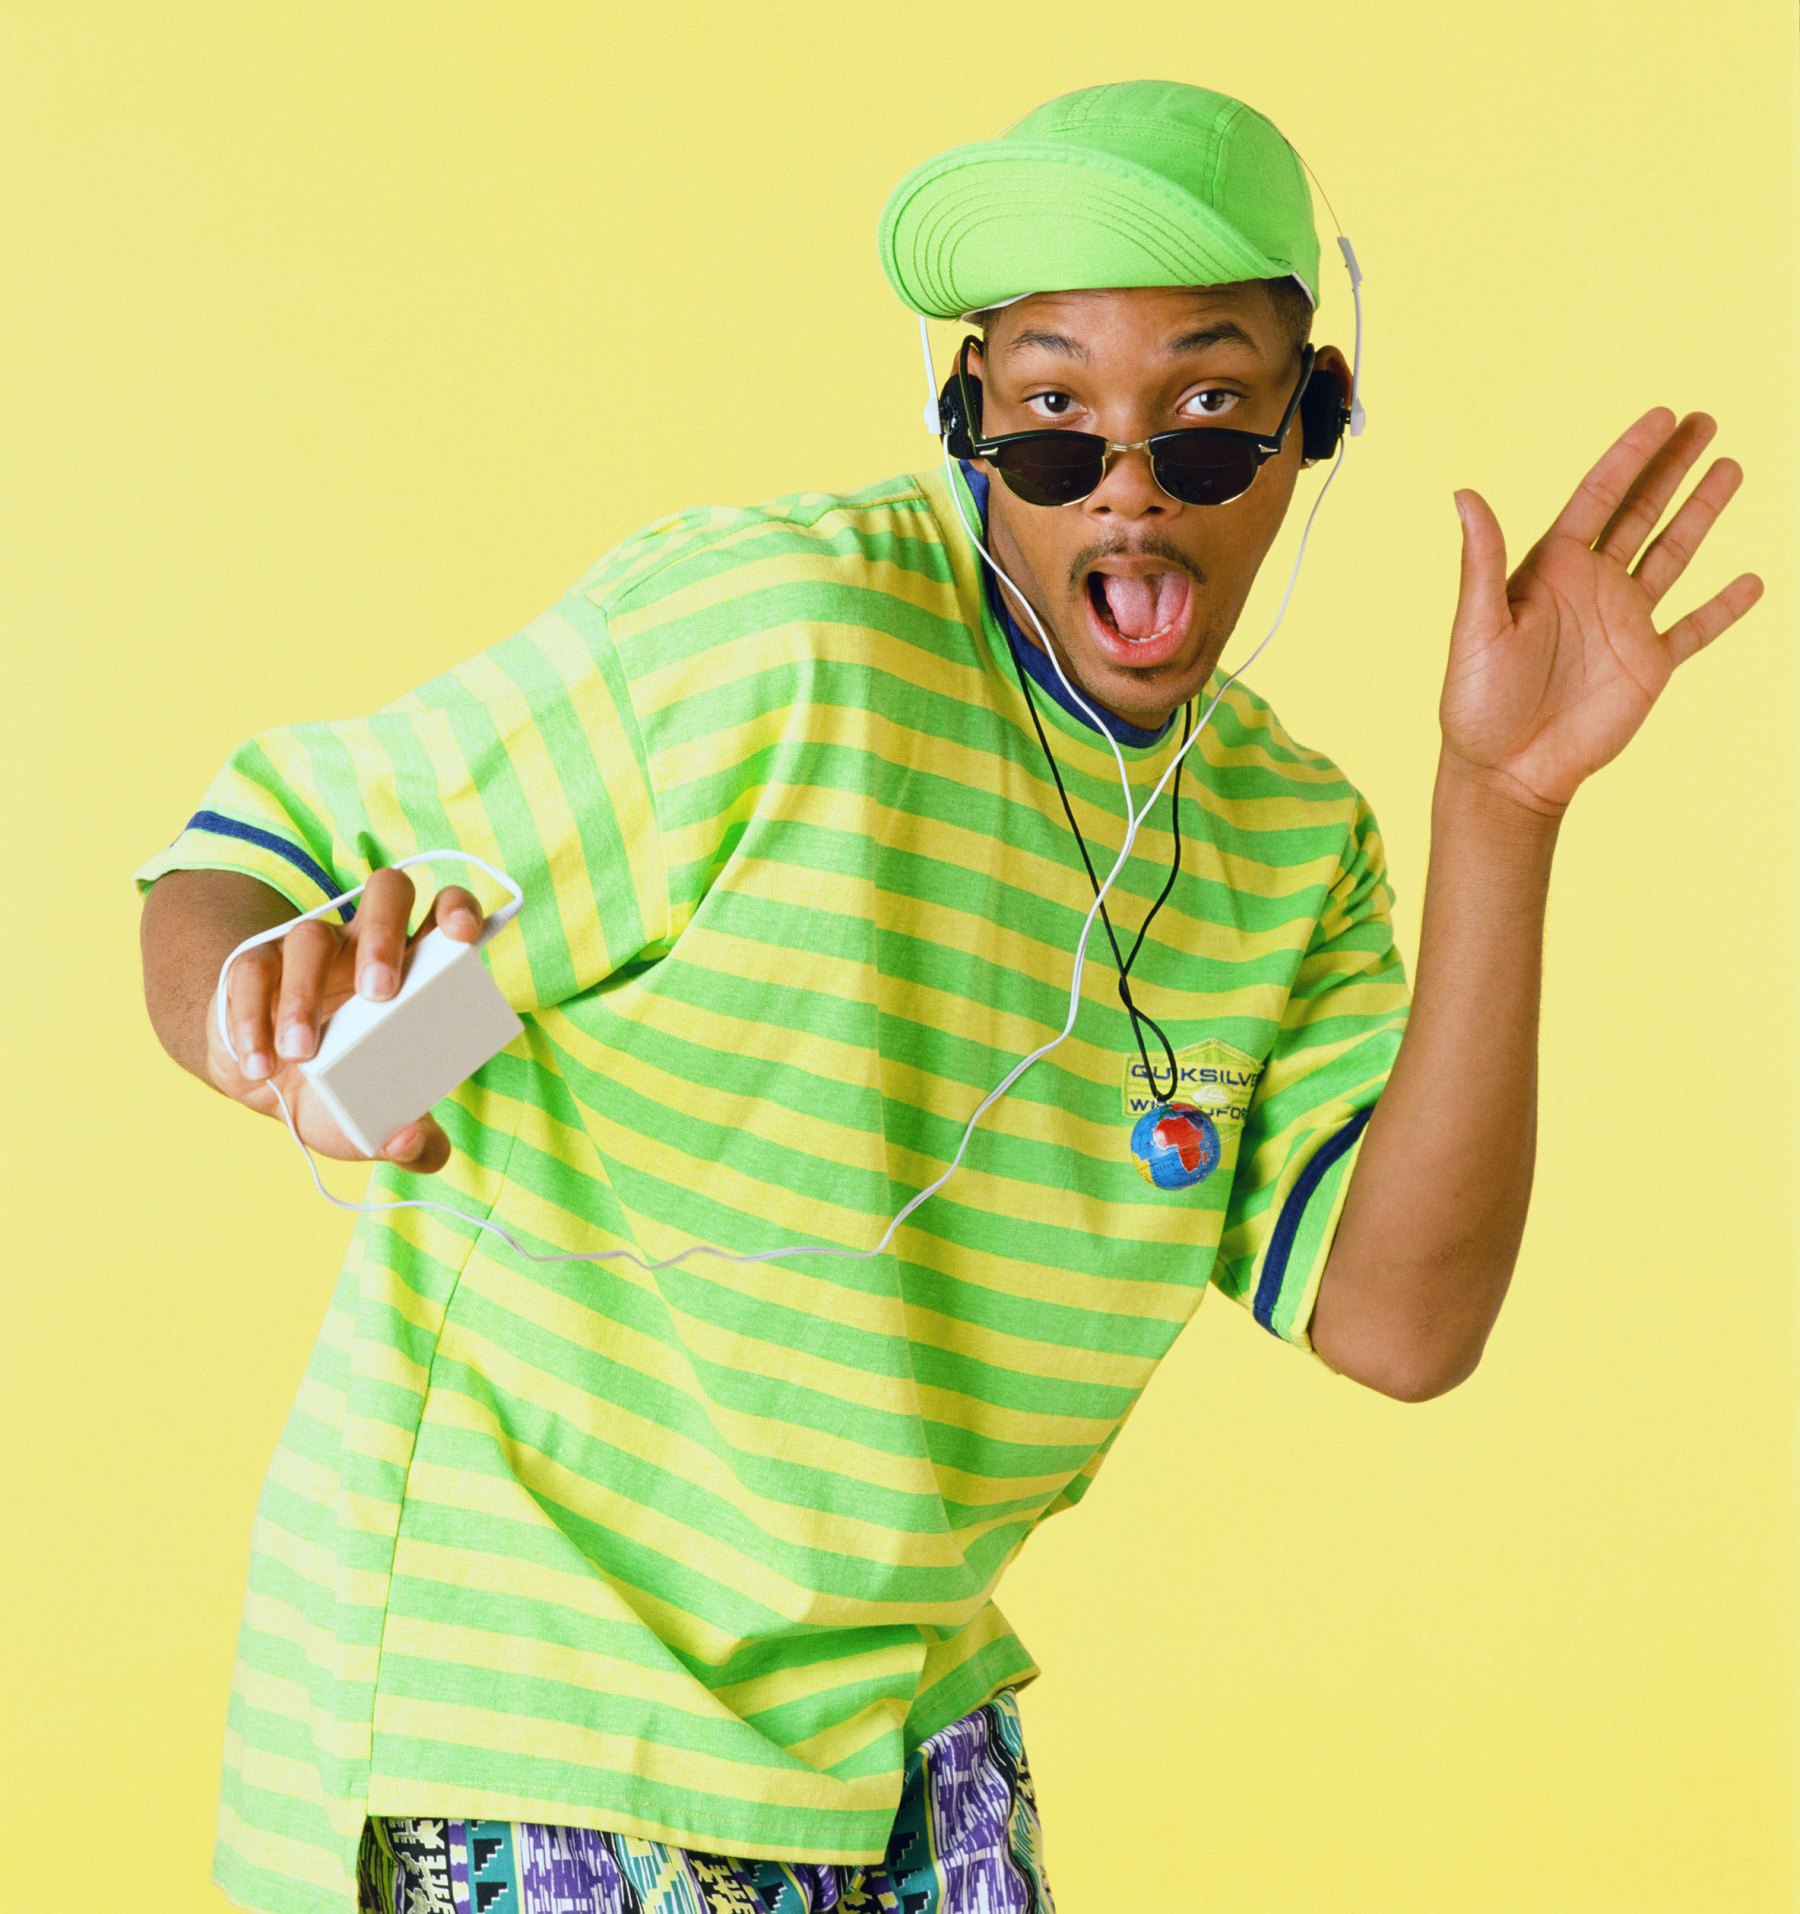 Will-Smith-Fresh-Prince-Bel-Air-Promo.jp